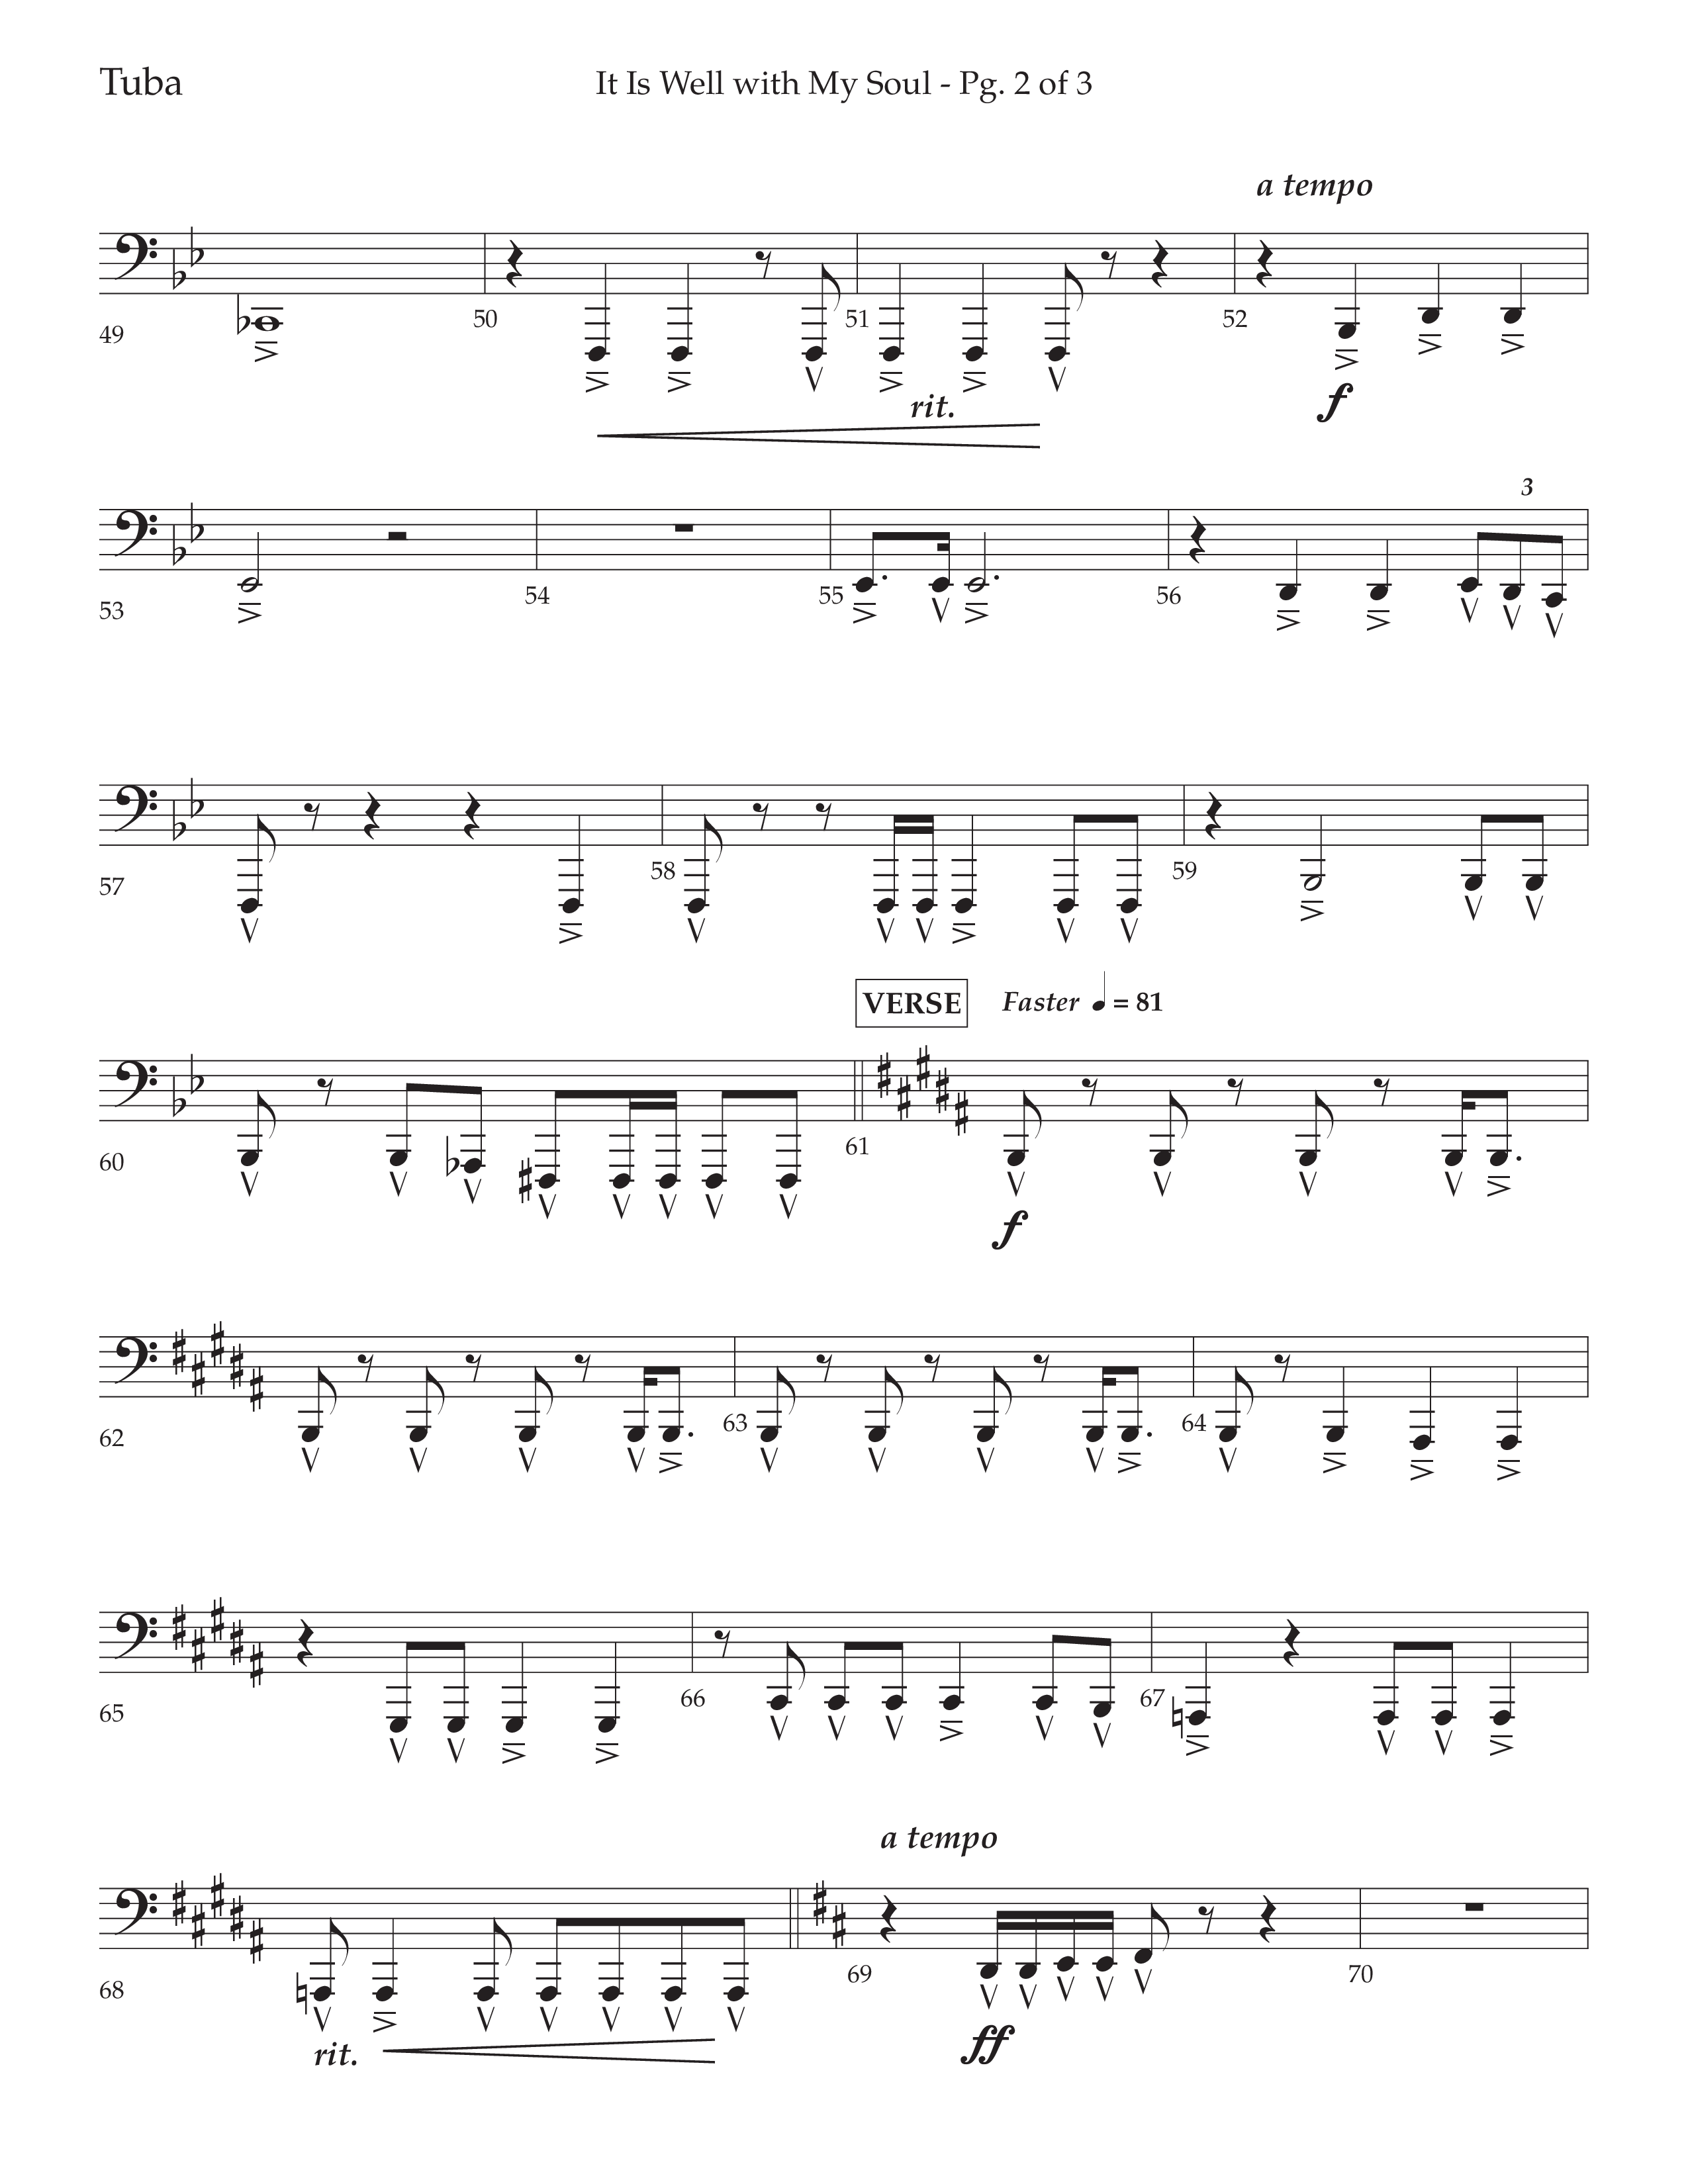 It Is Well With My Soul (Choral Anthem SATB) Tuba (Lifeway Choral / Arr. John Bolin / Orch. David Clydesdale)